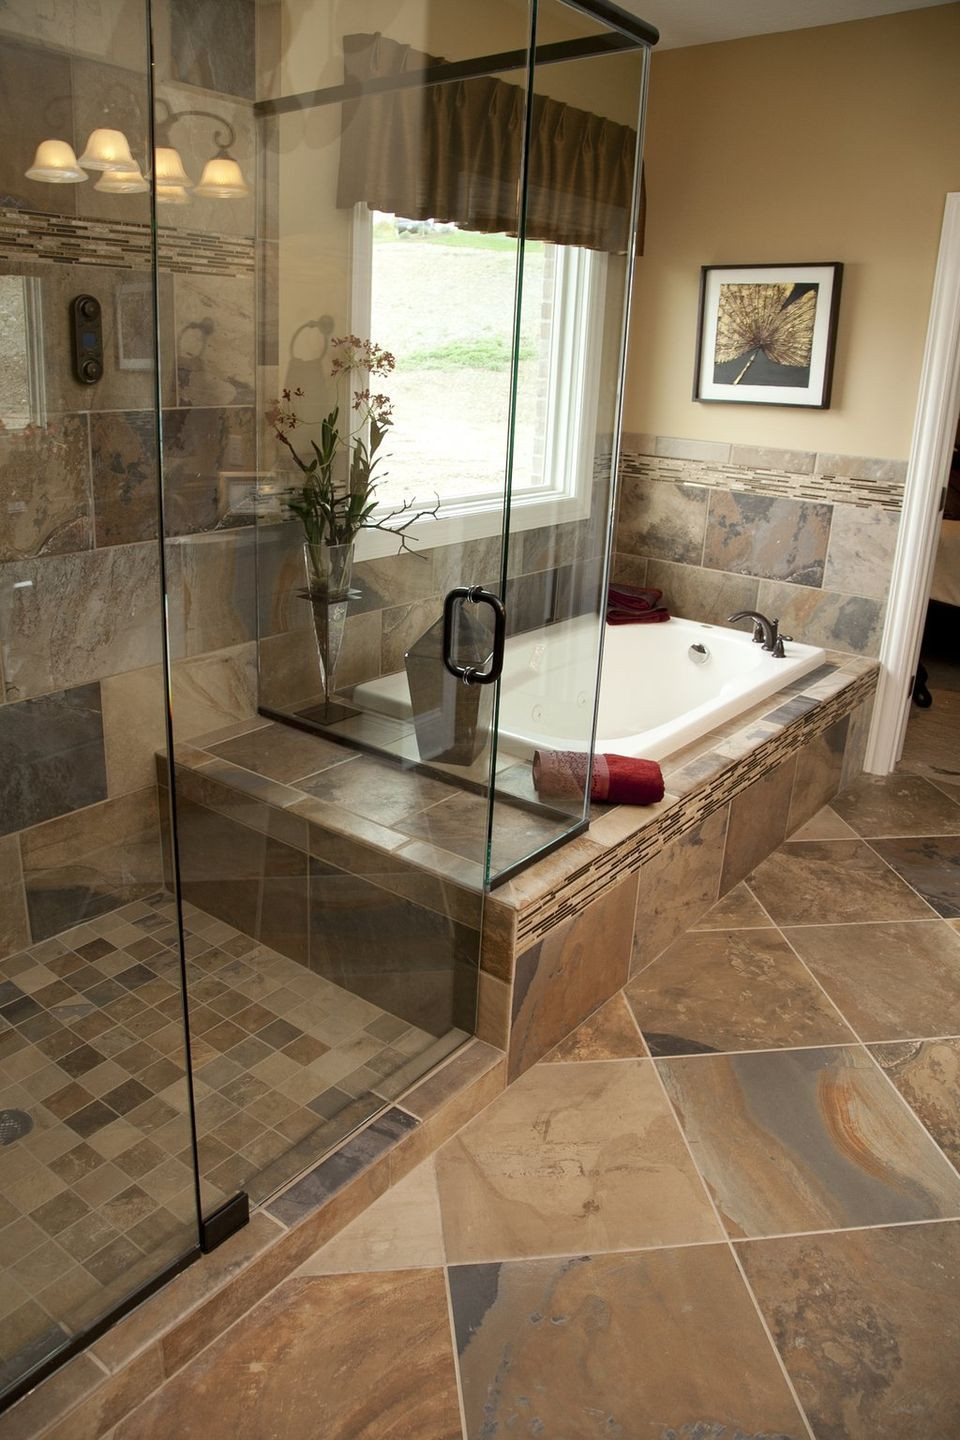 Bathroom Wall Tiles Design
 The 5 best designs from Homearama 2012